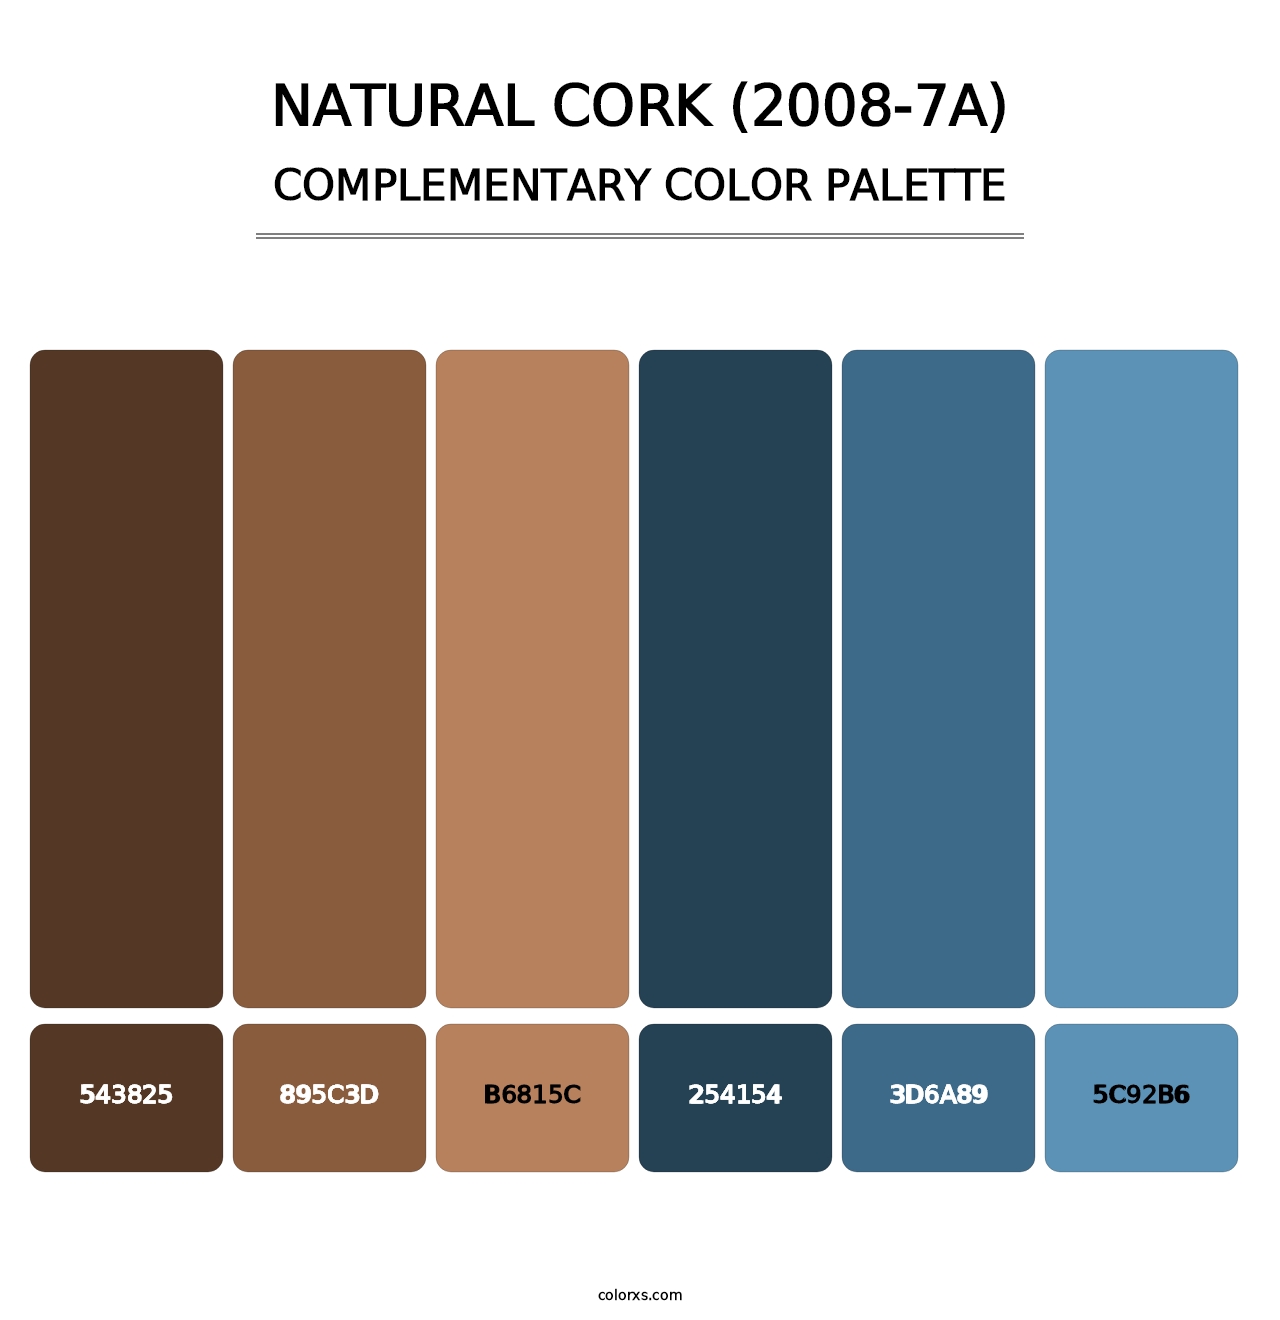 Natural Cork (2008-7A) - Complementary Color Palette